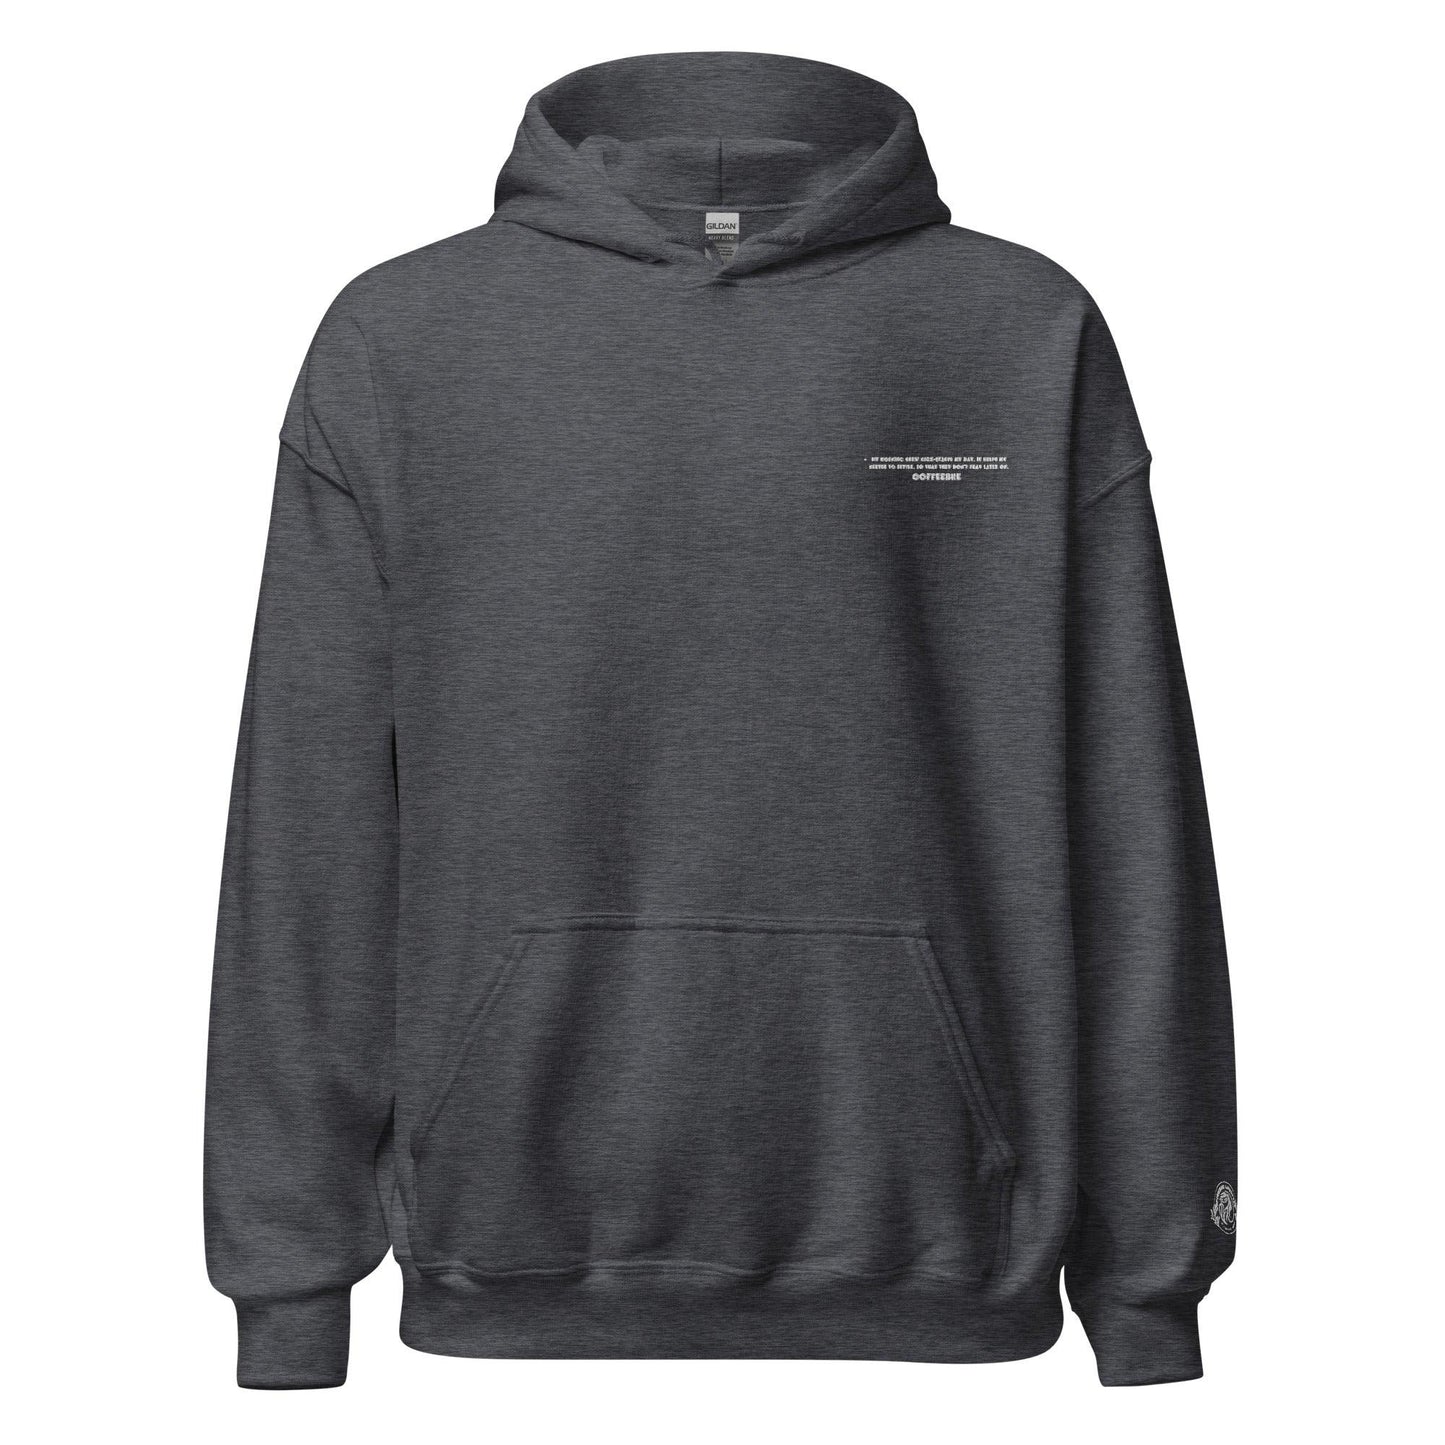 Embroidered Pullover Unisex Hoodies - COFFEEBRE